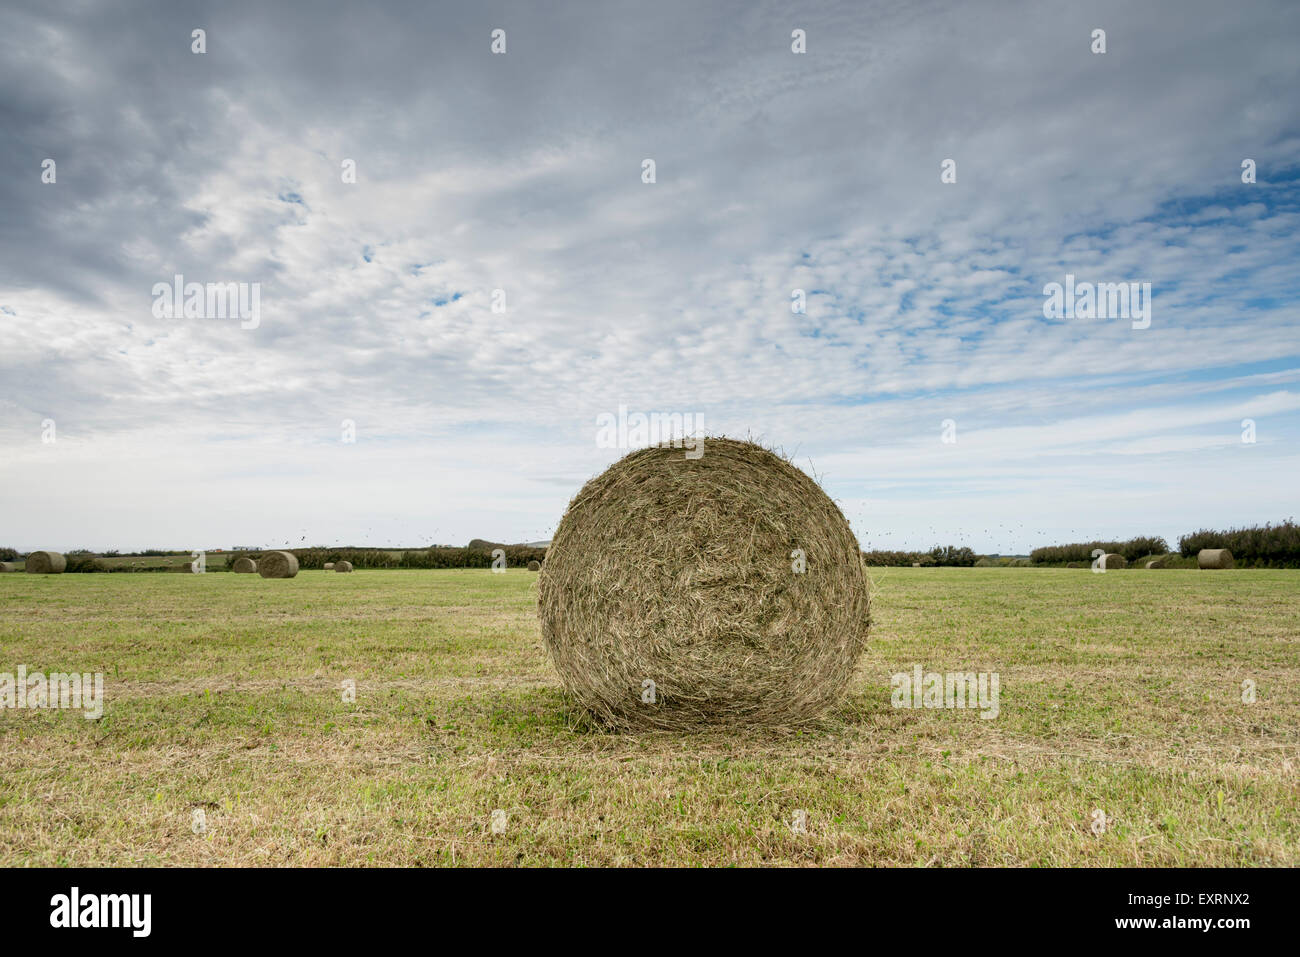 A large round hay bale in a field on a farm in the UK Stock Photo